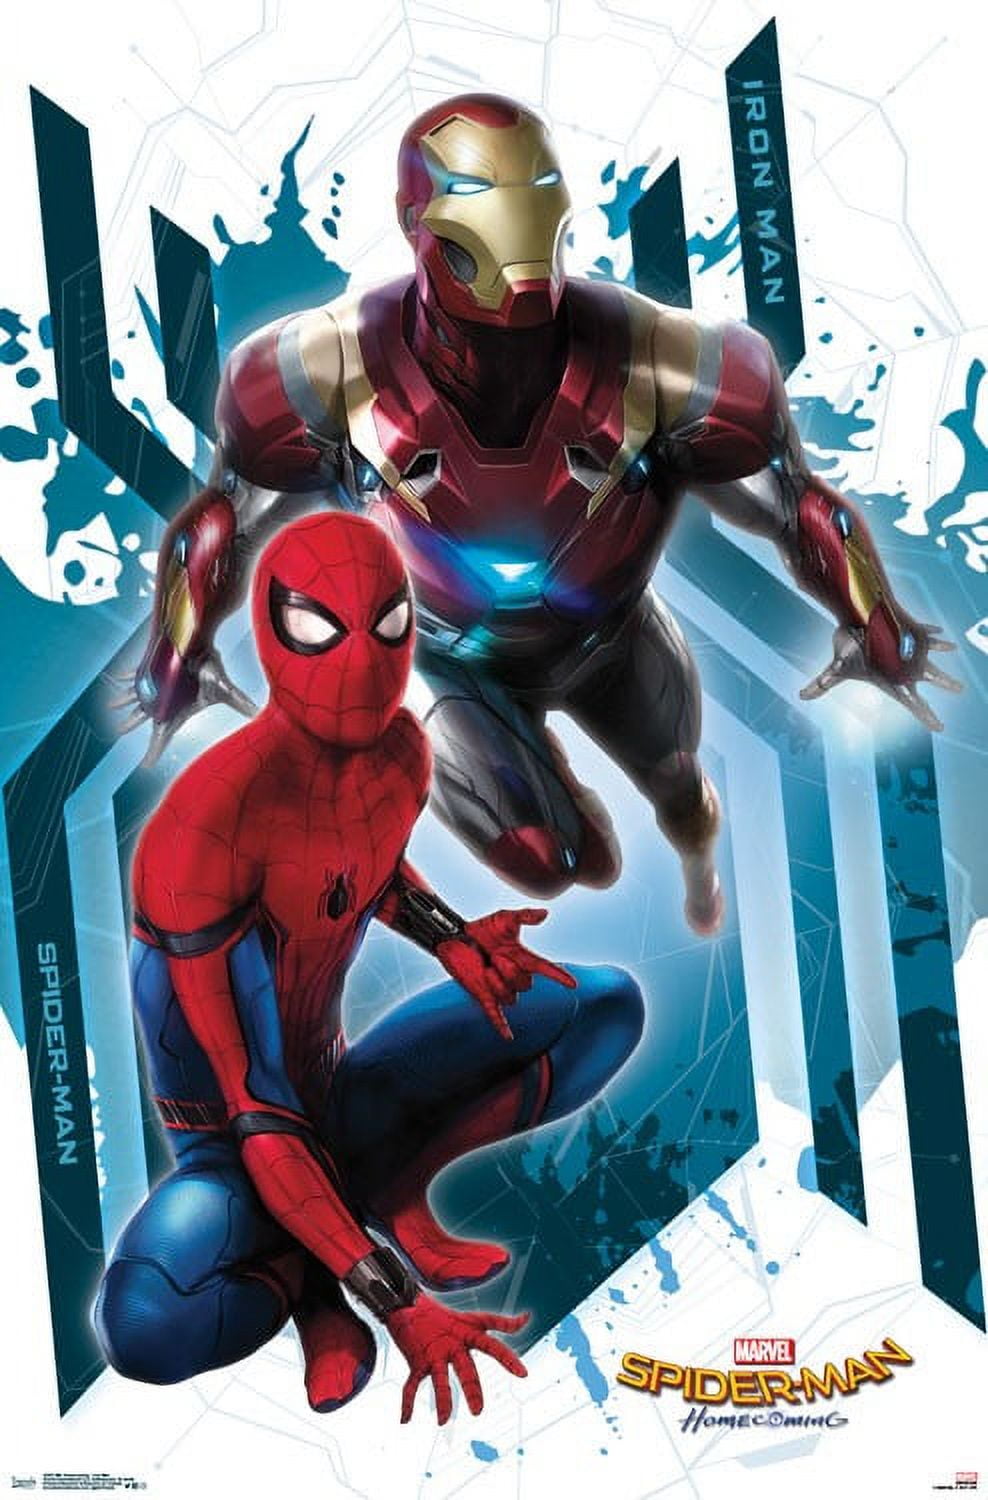 Spiderman Homecoming Poster - Fineartsfrance